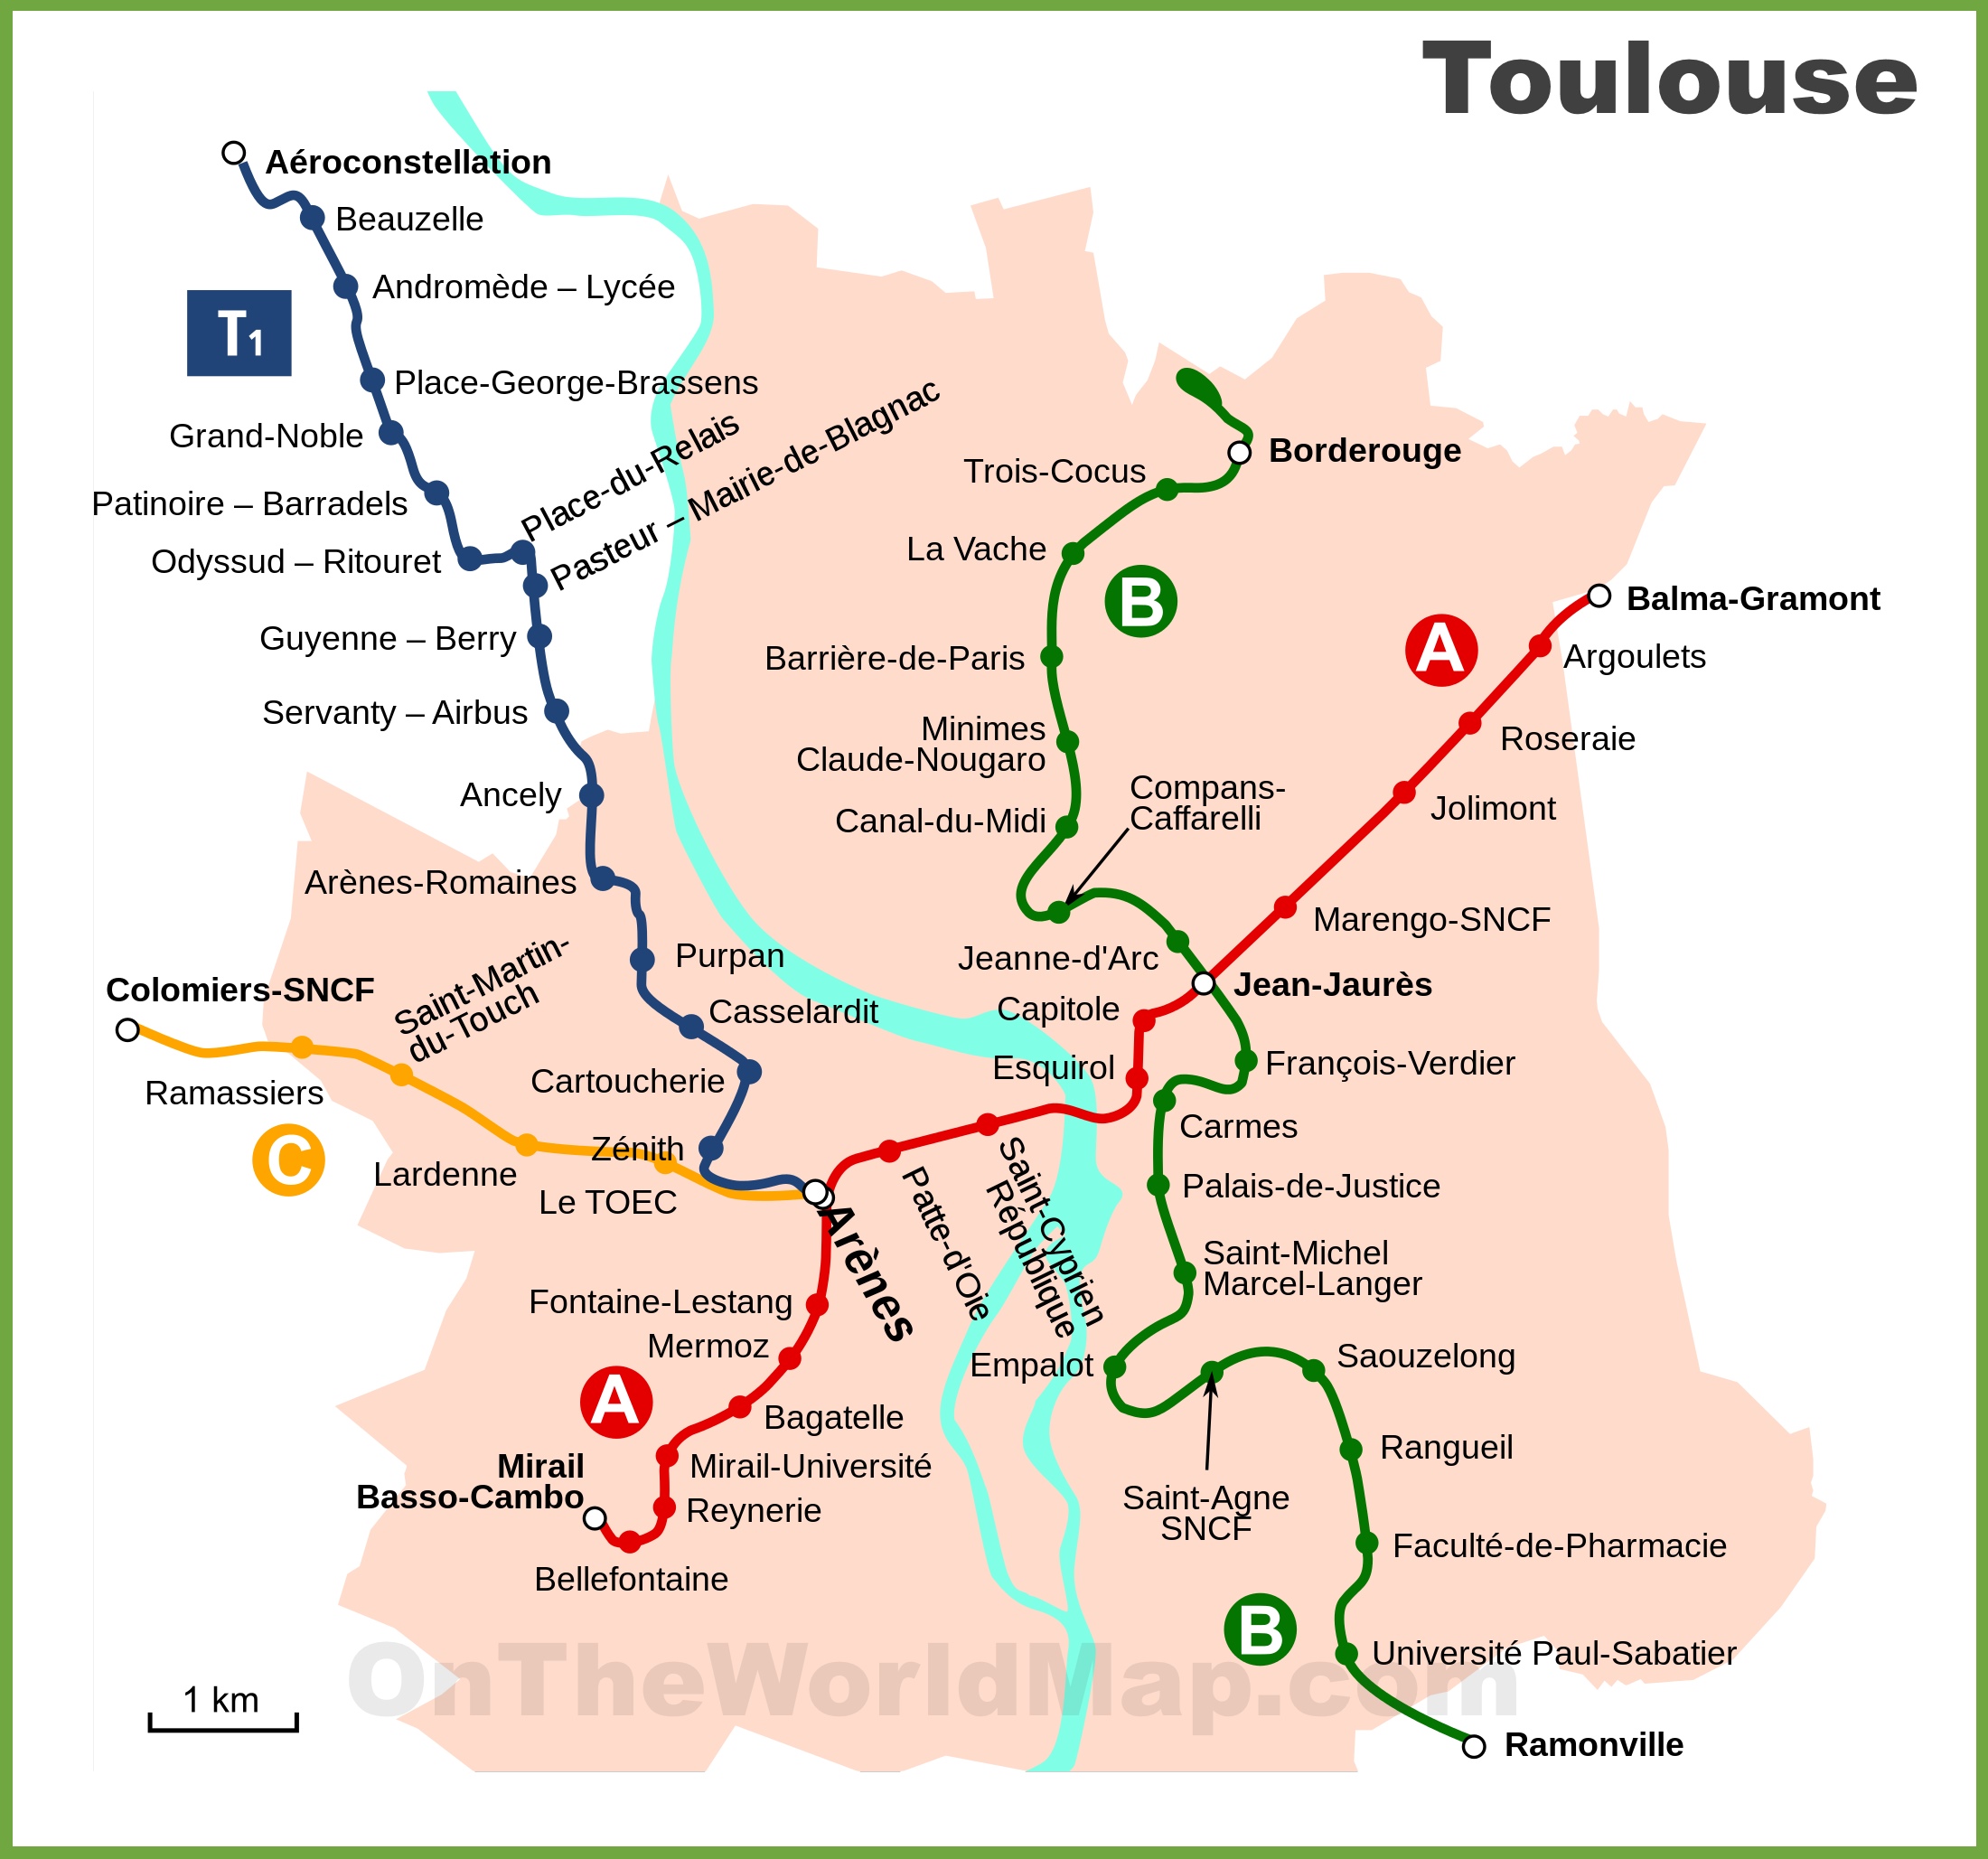 Toulouse Tram Map